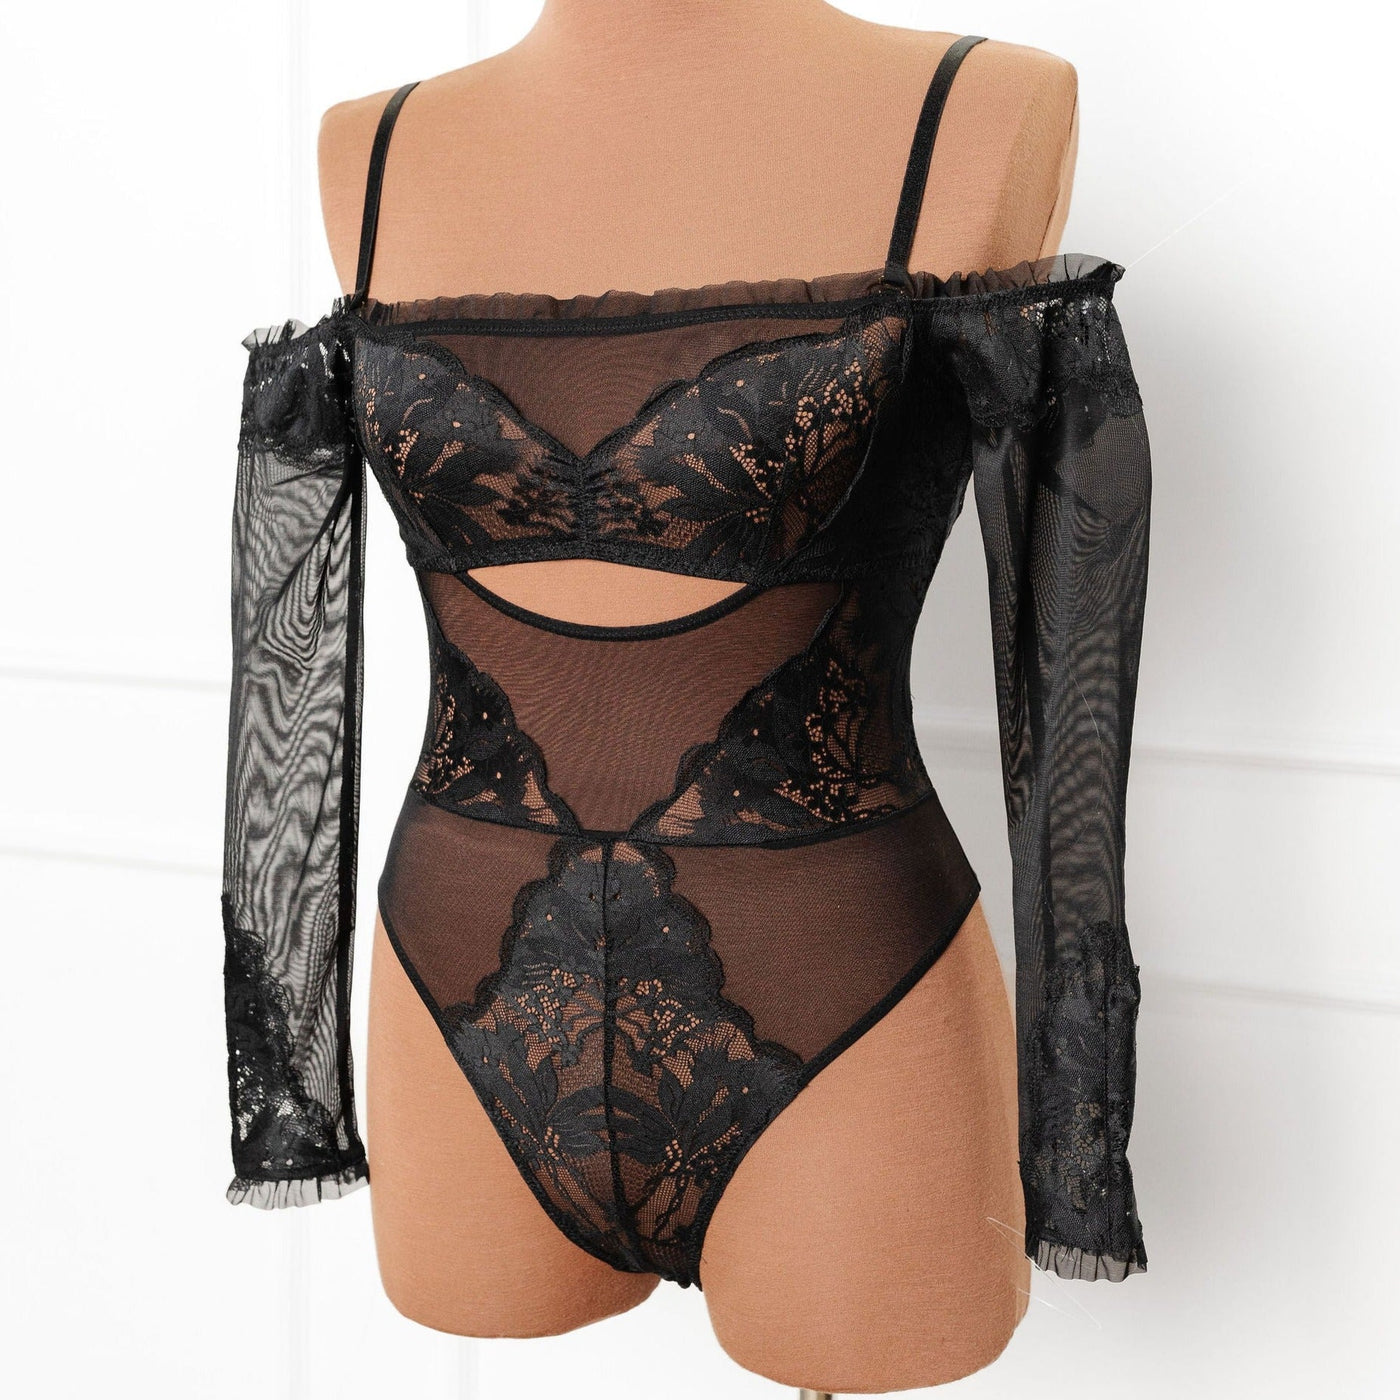 Lace & Mesh Off-The-Shoulder Crotchless Teddy - Black - Mentionables